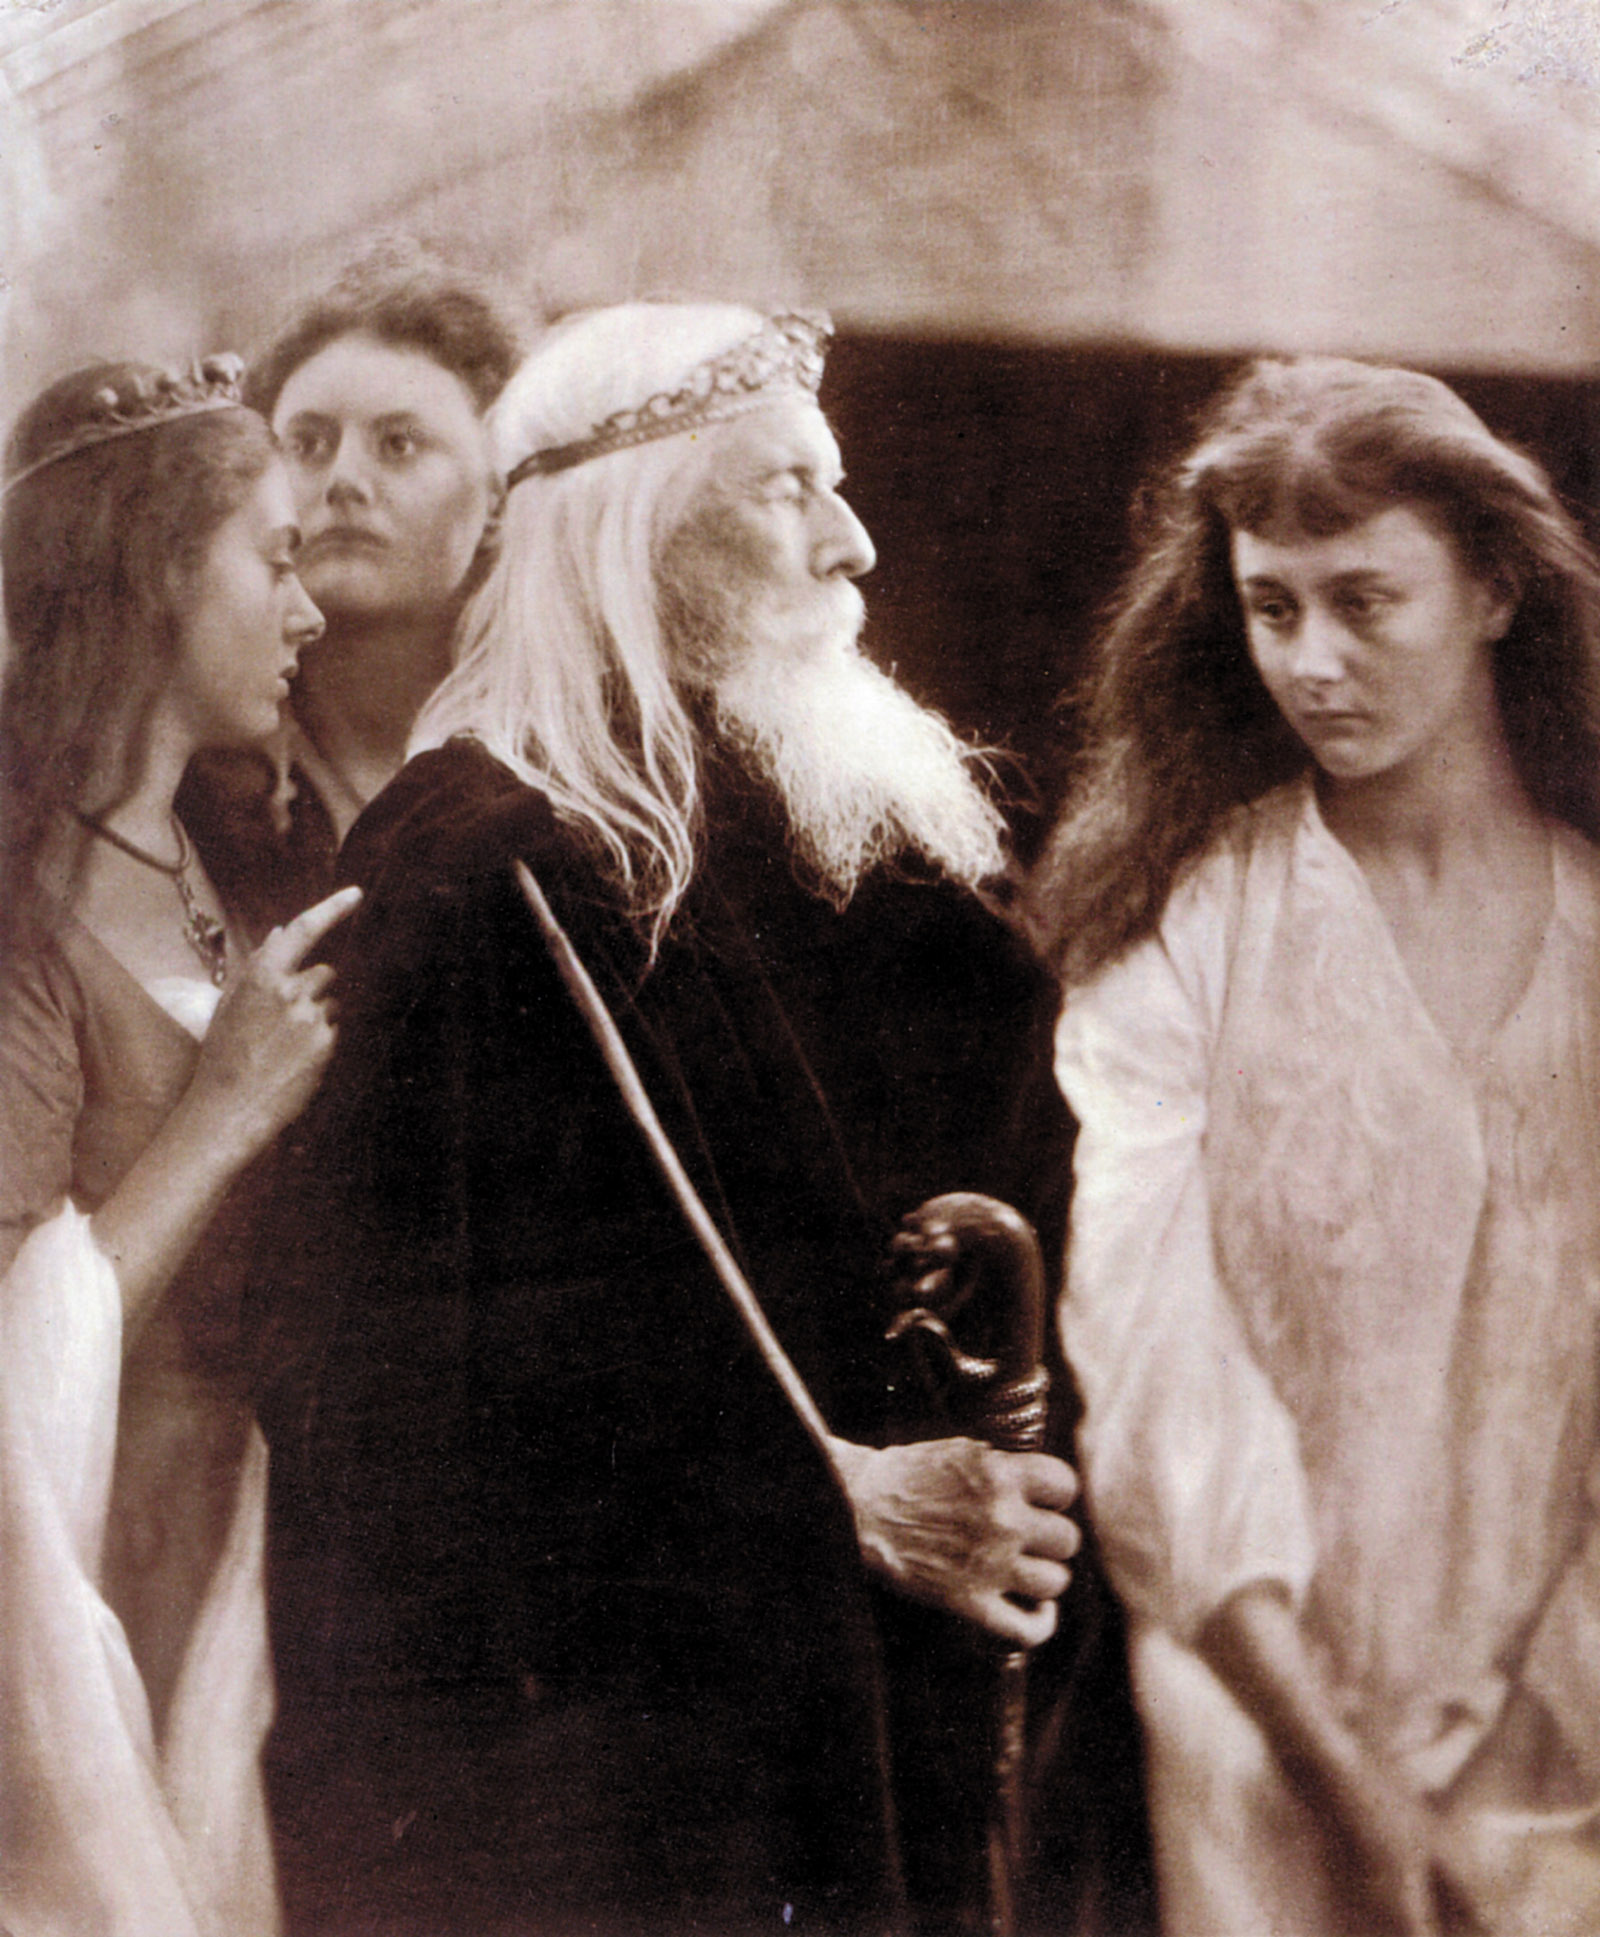 ‘King Lear Allotting His Kingdom to His Three Daughters’; photograph by Julia Margaret Cameron, 1872. From left are Lorina Liddell, Edith Liddell, Charles Hay Cameron, and Alice Liddell.